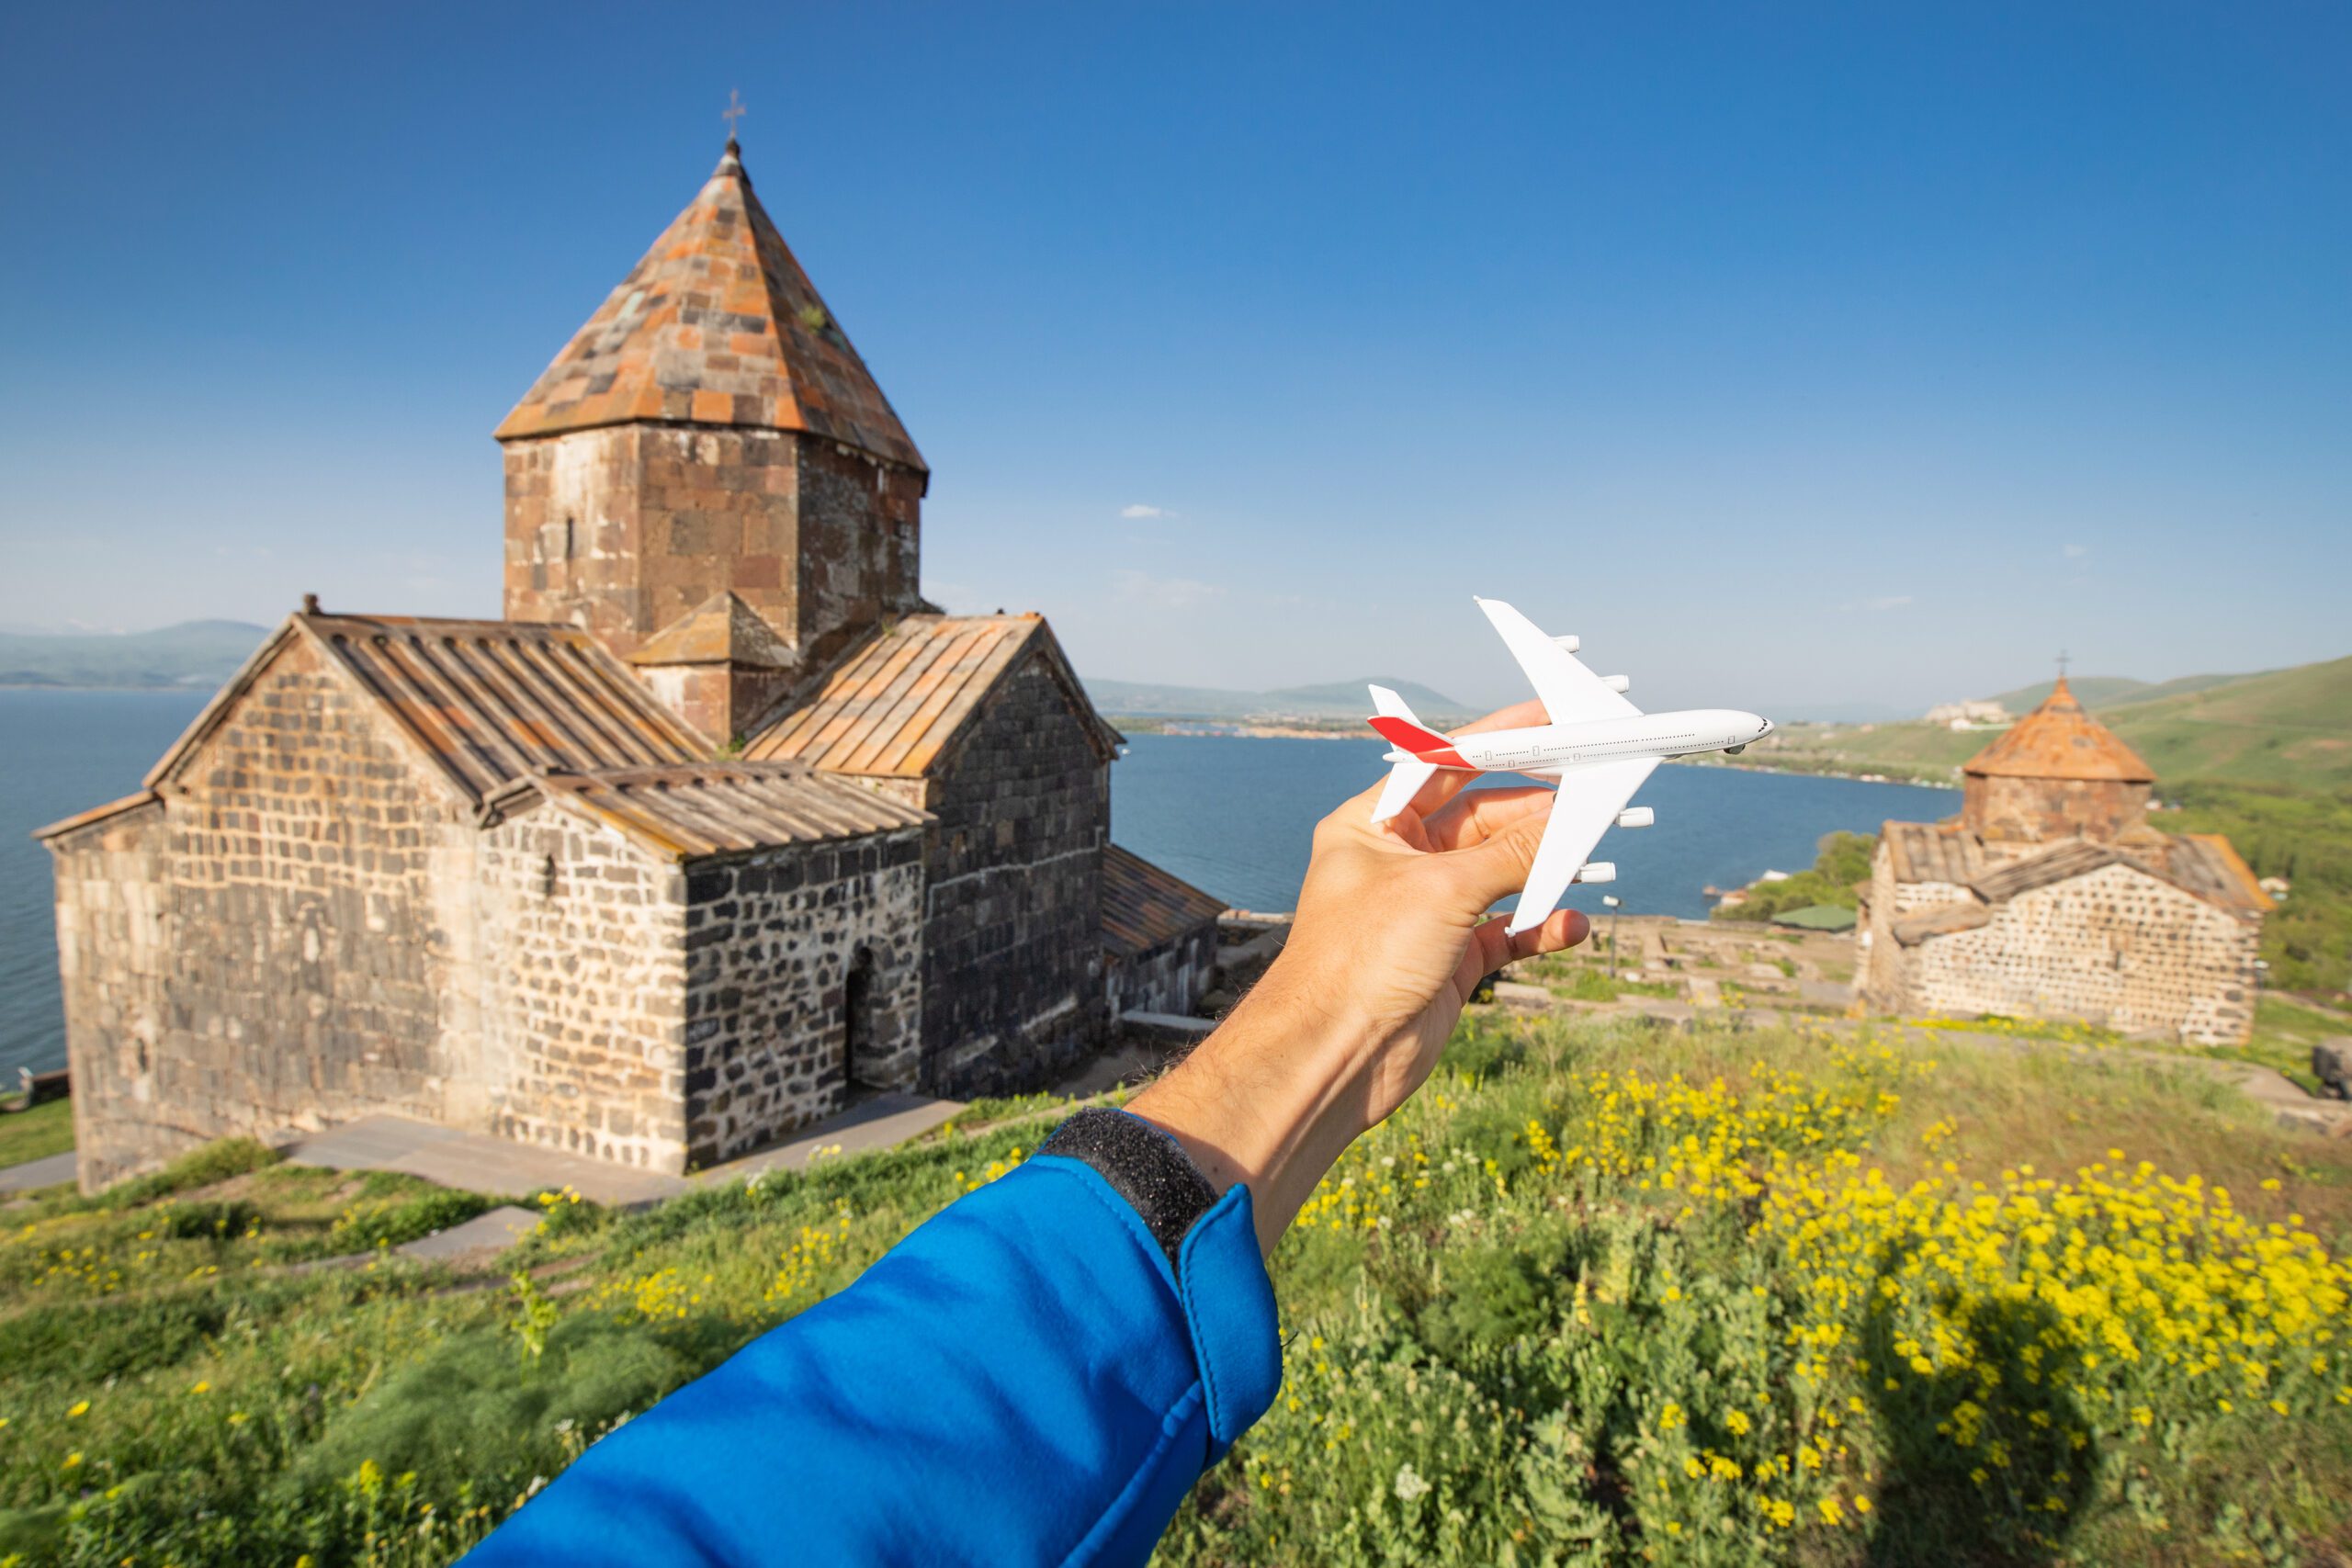 Tourist with a toy airplane on the background of a traditional Armenian ancient church and Sevan lake. Concept of air flight transportation